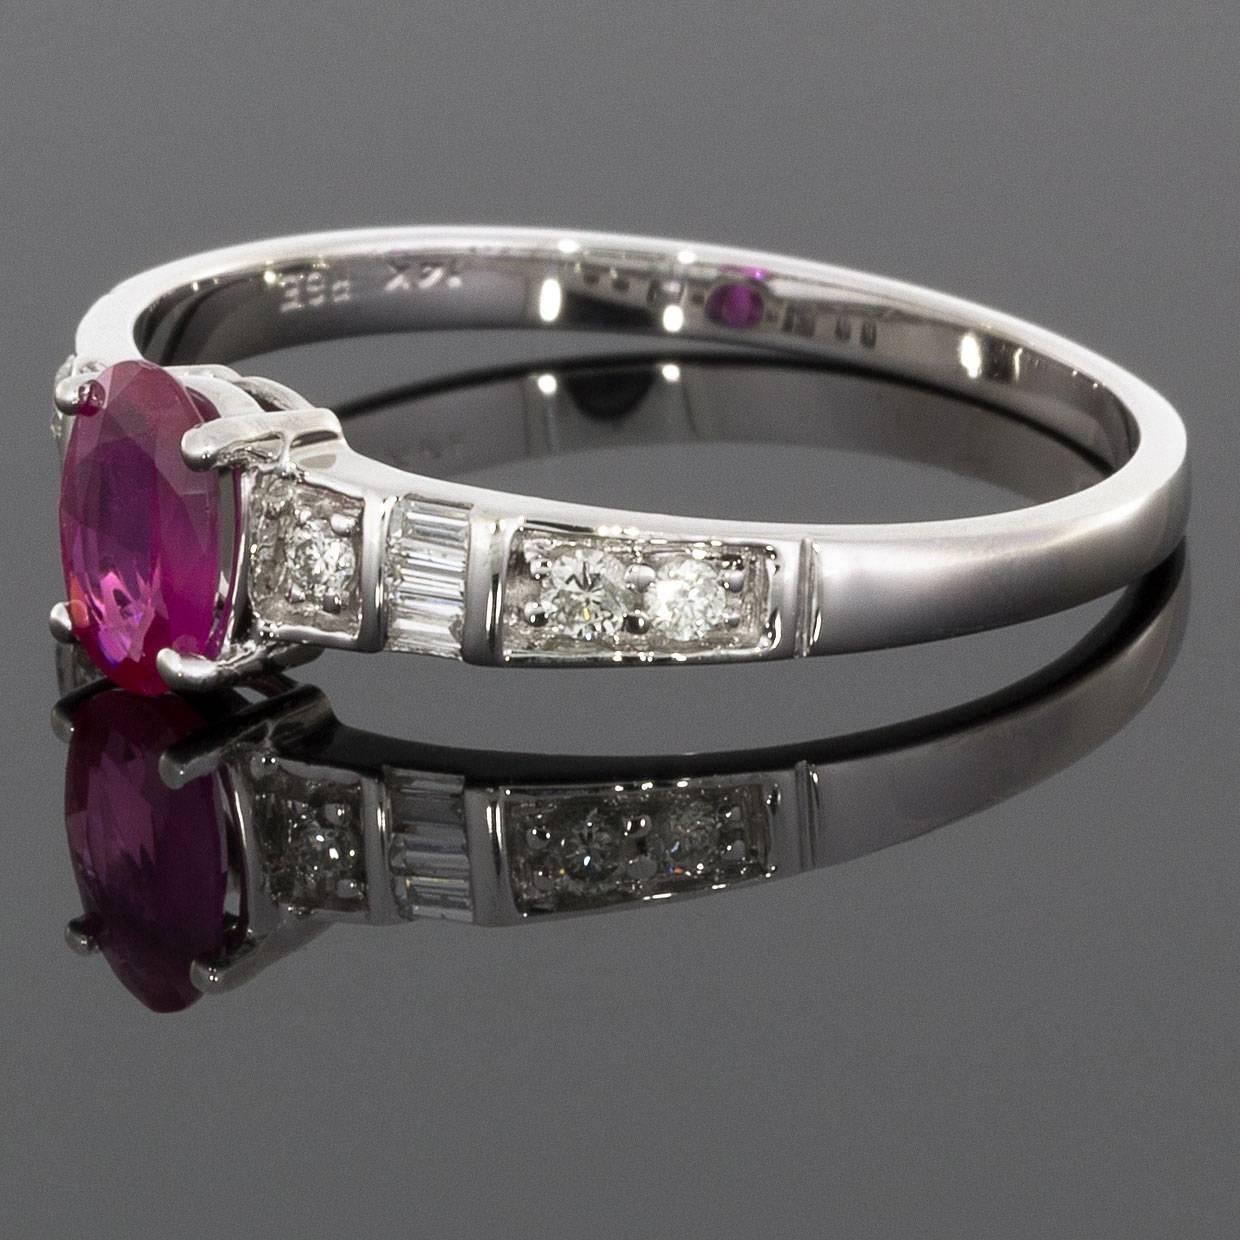 This luscious ruby ring has a beautiful art deco style that gives a really timeless & elegant look! The ring features an oval cut, natural, ruby center. The ring's shoulders are accented with round brilliant & baguette cut diamonds. The ring